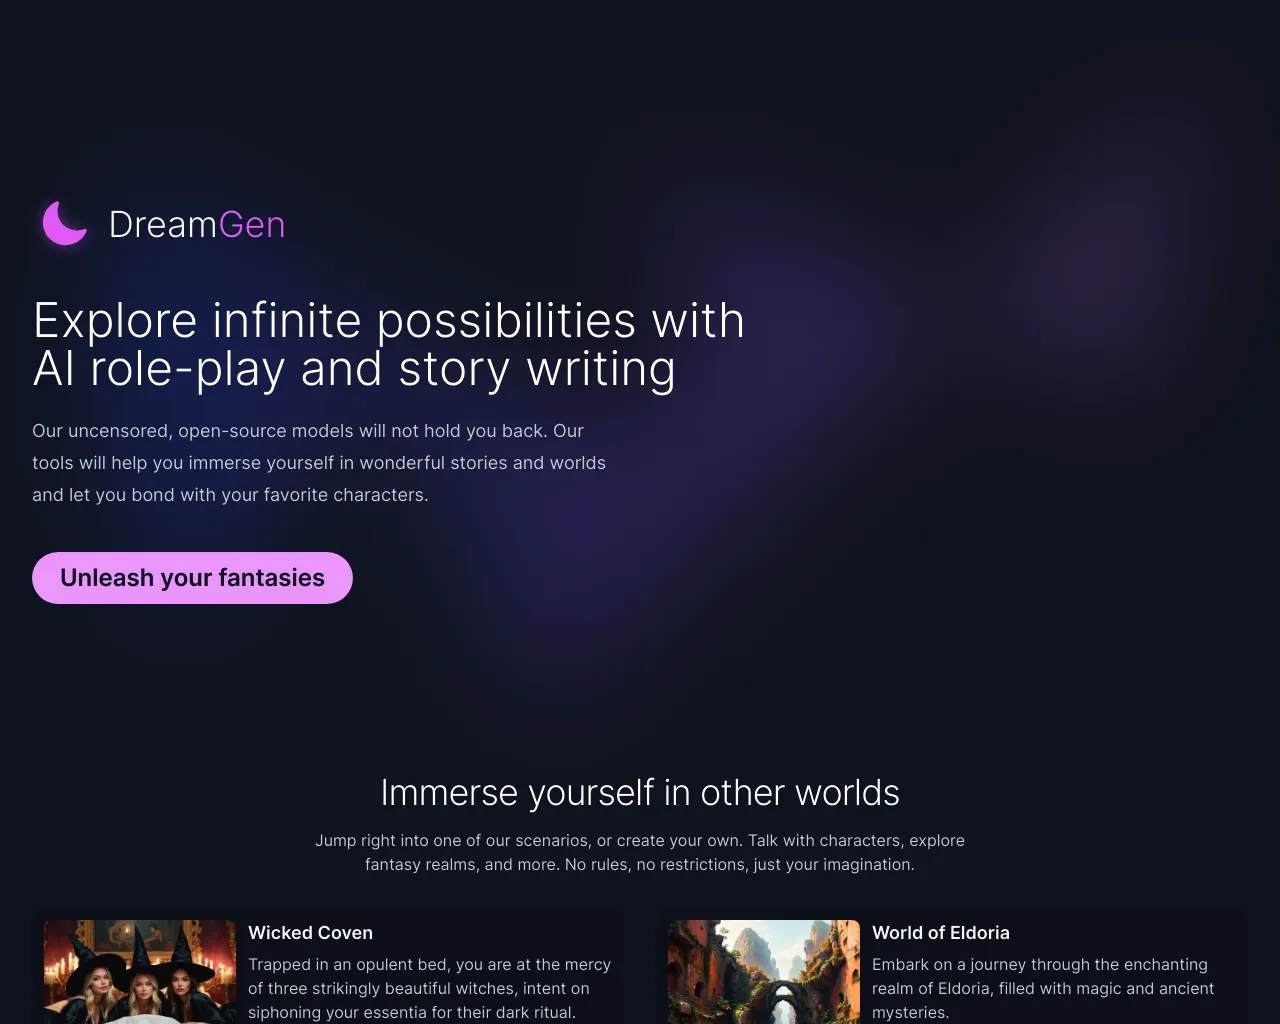 DreamGen: AI role-playing and strory-writing